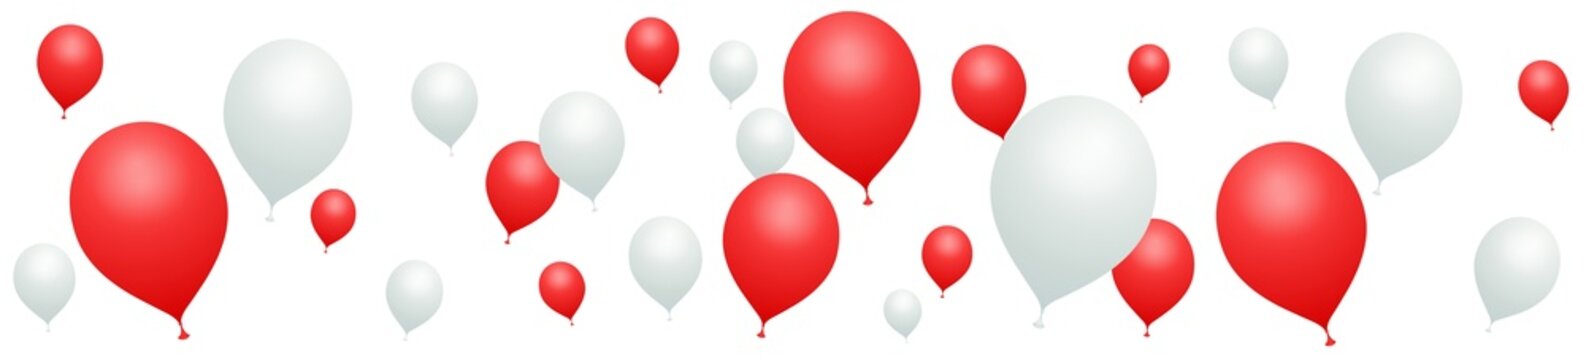 Banner red and white balloons on white background